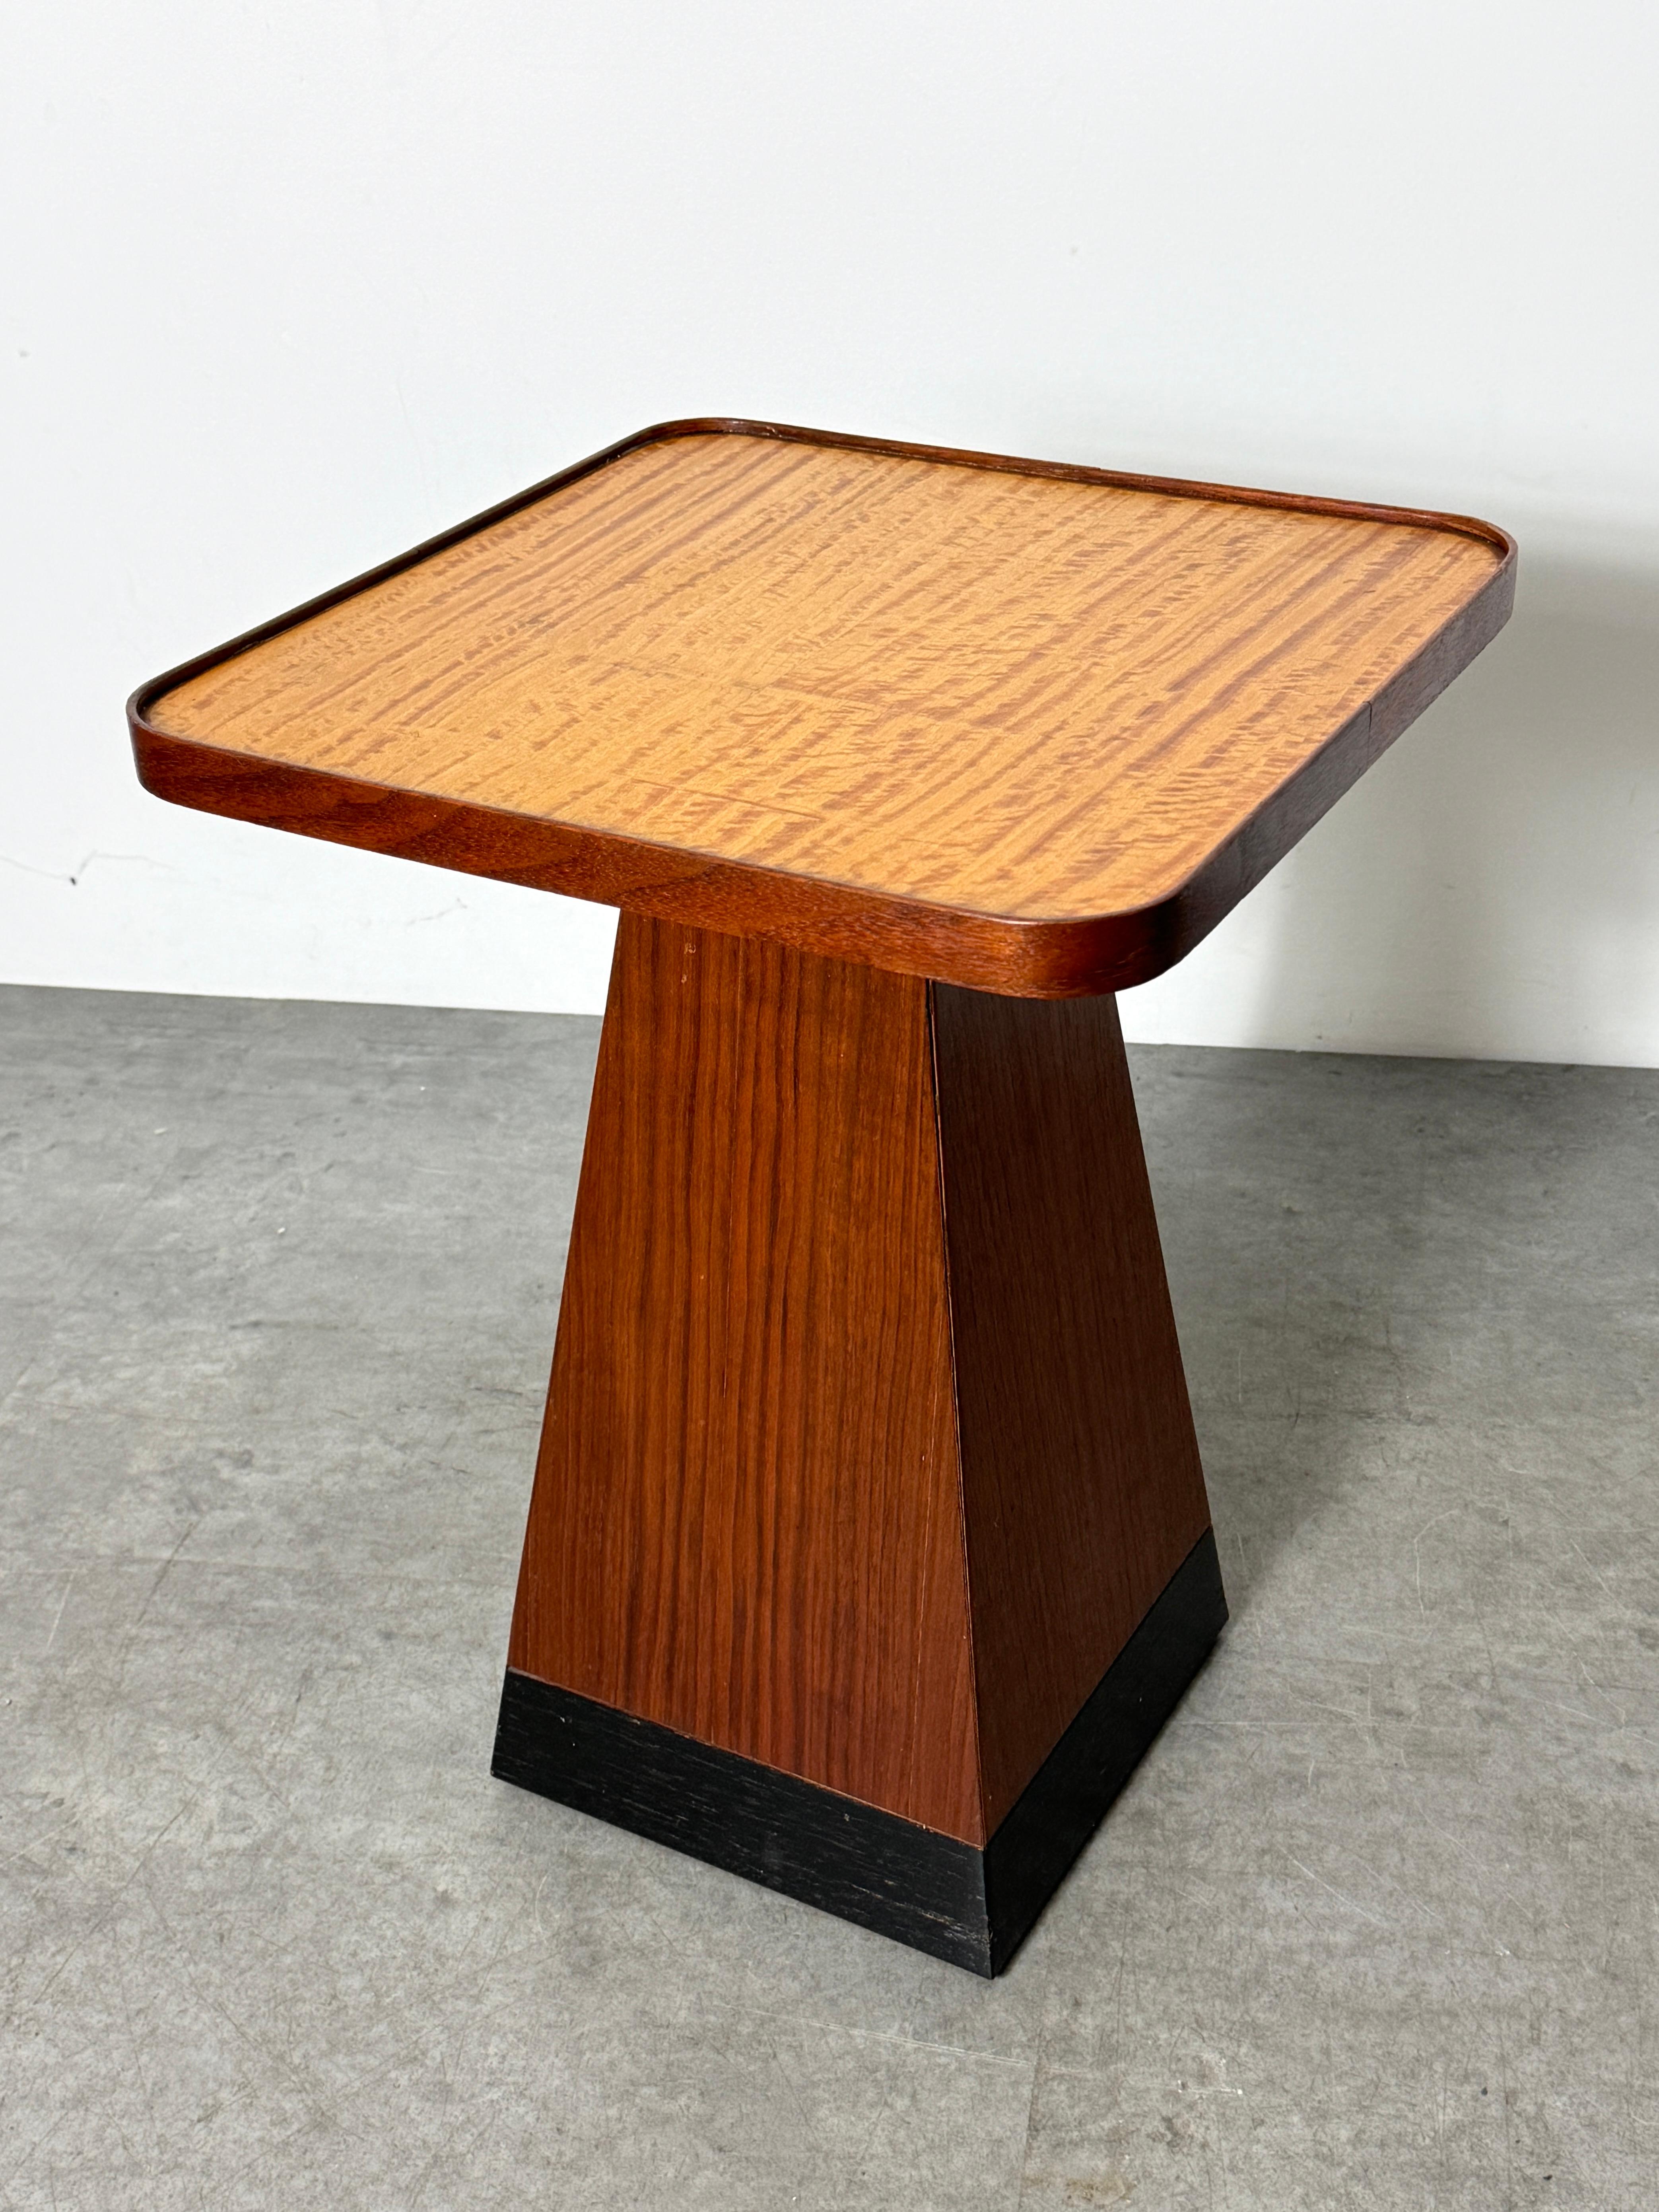 Late 20th Century Mid Century Modern Walnut Satinwood Square Pyramid Side Pedestal Table 1970s For Sale